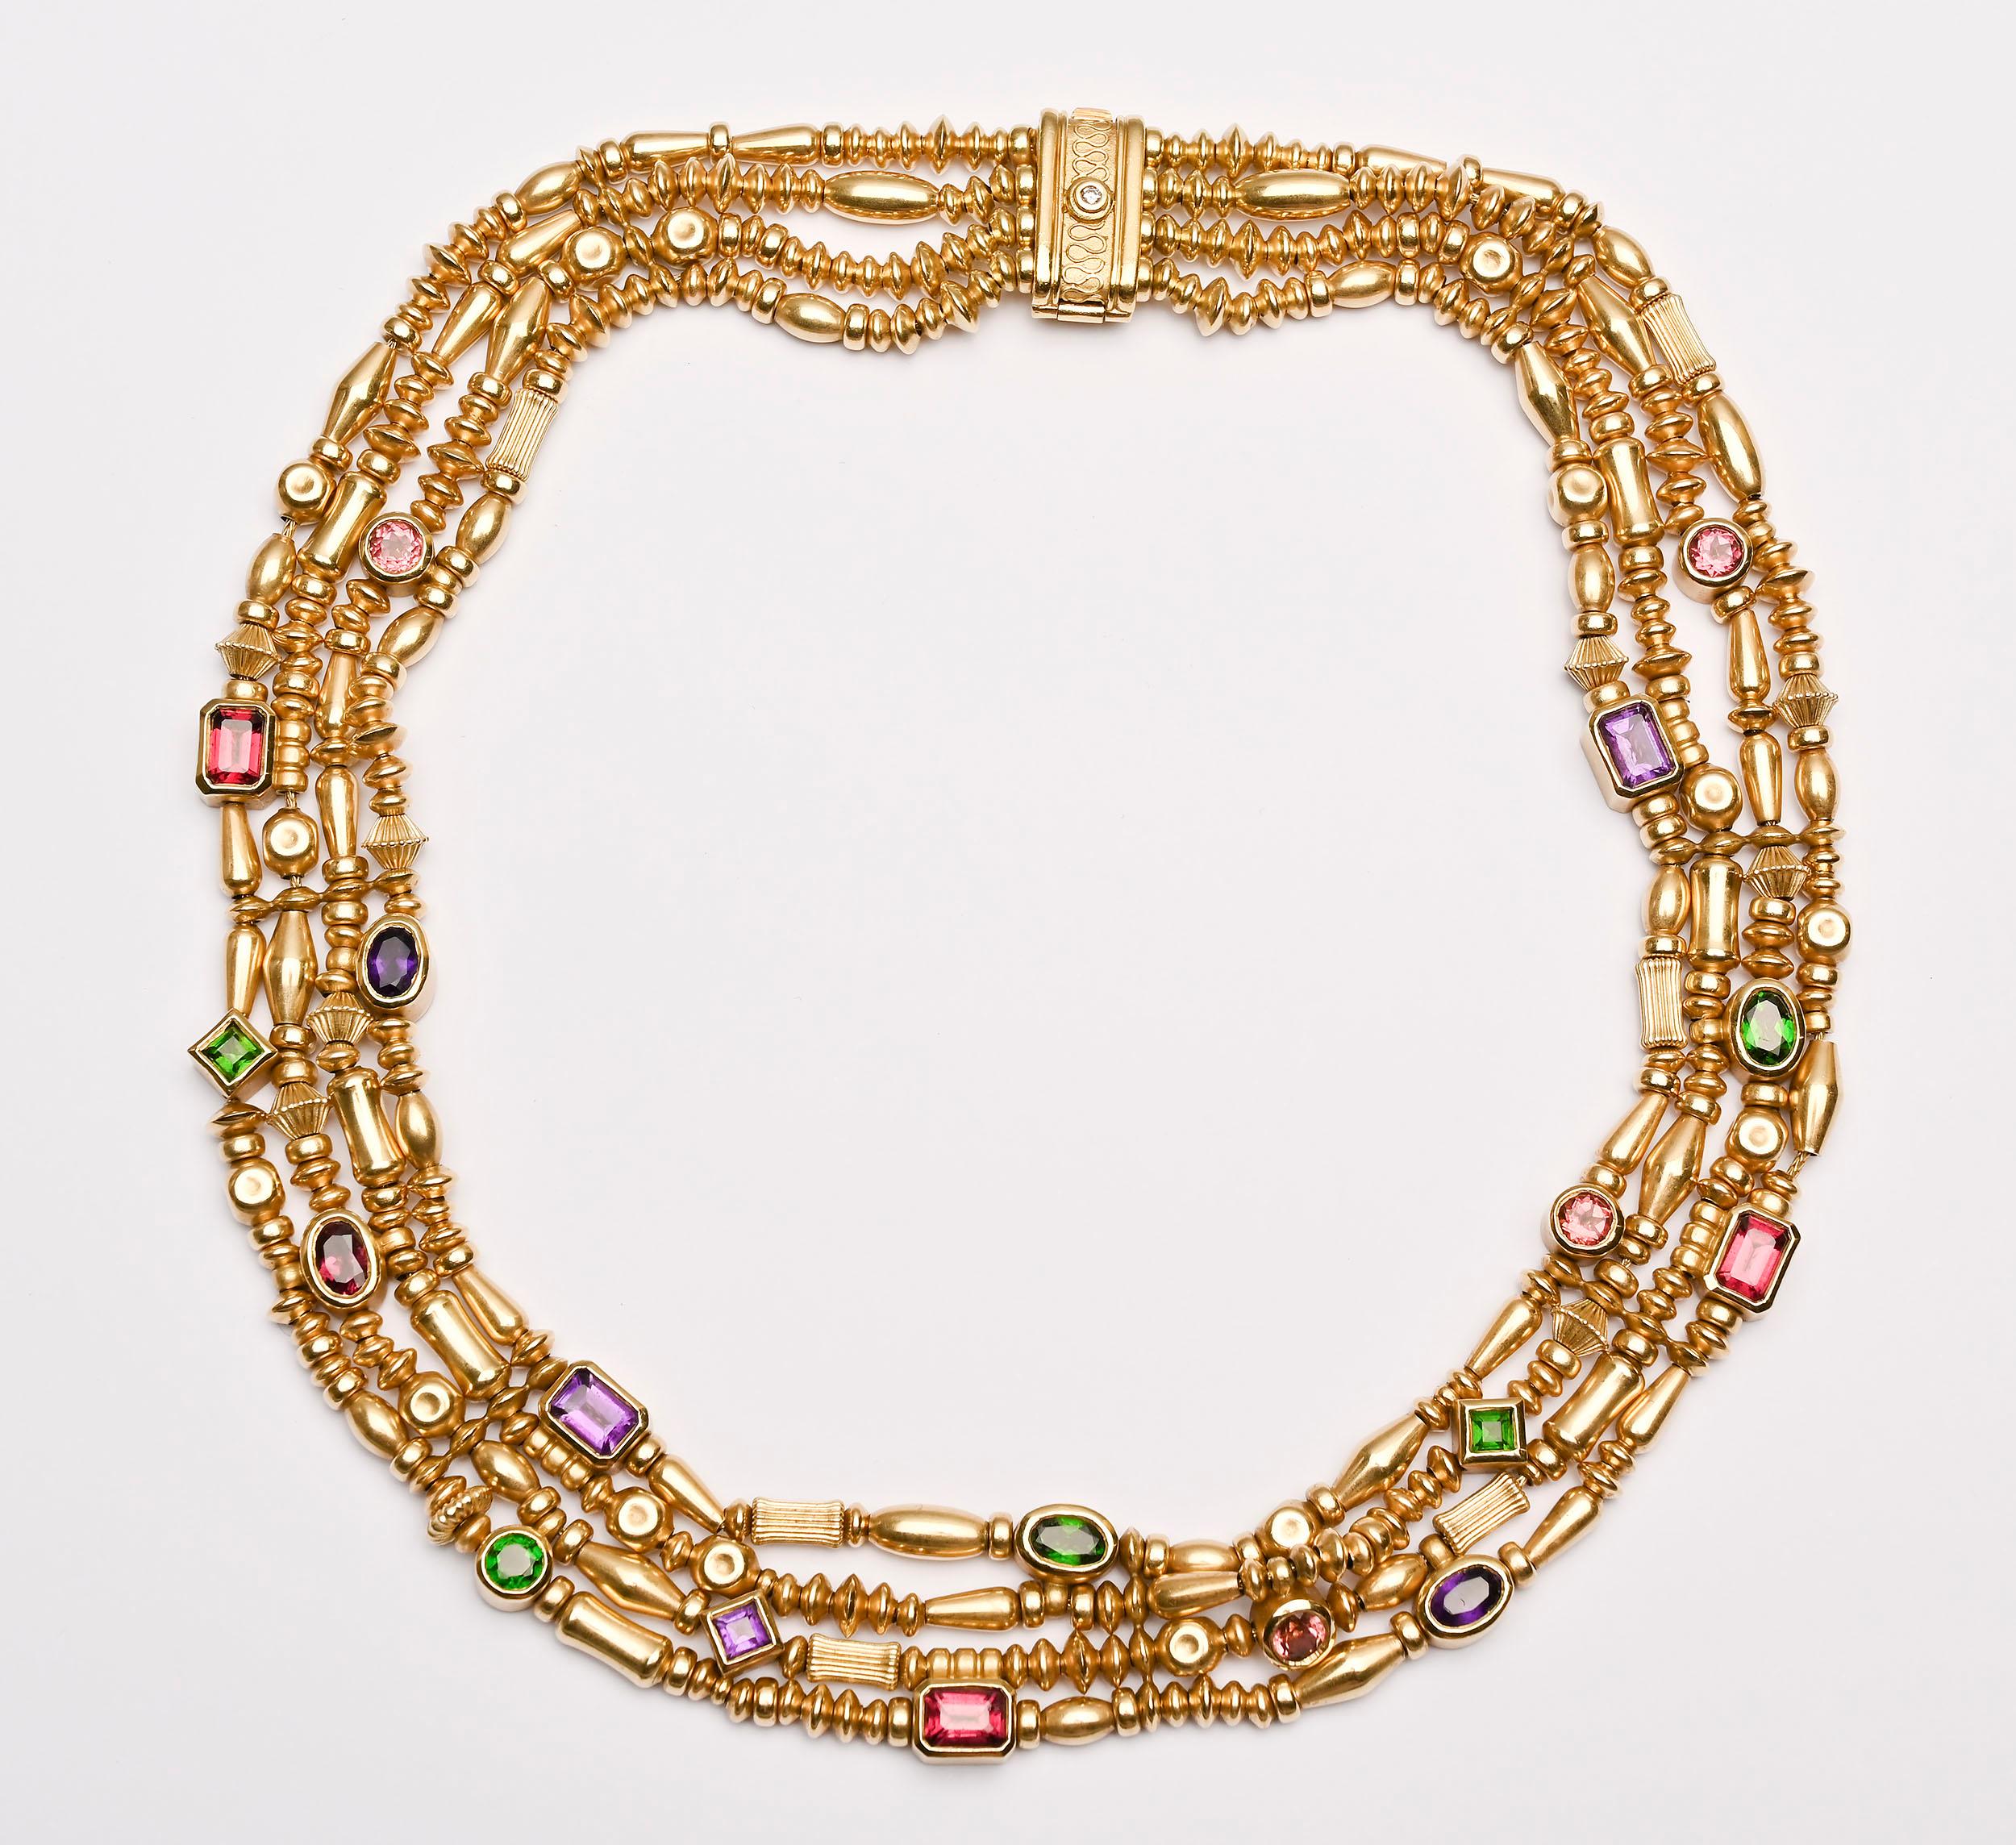 Contemporary Seidengang Multistrand Gold Necklace with Gemstones